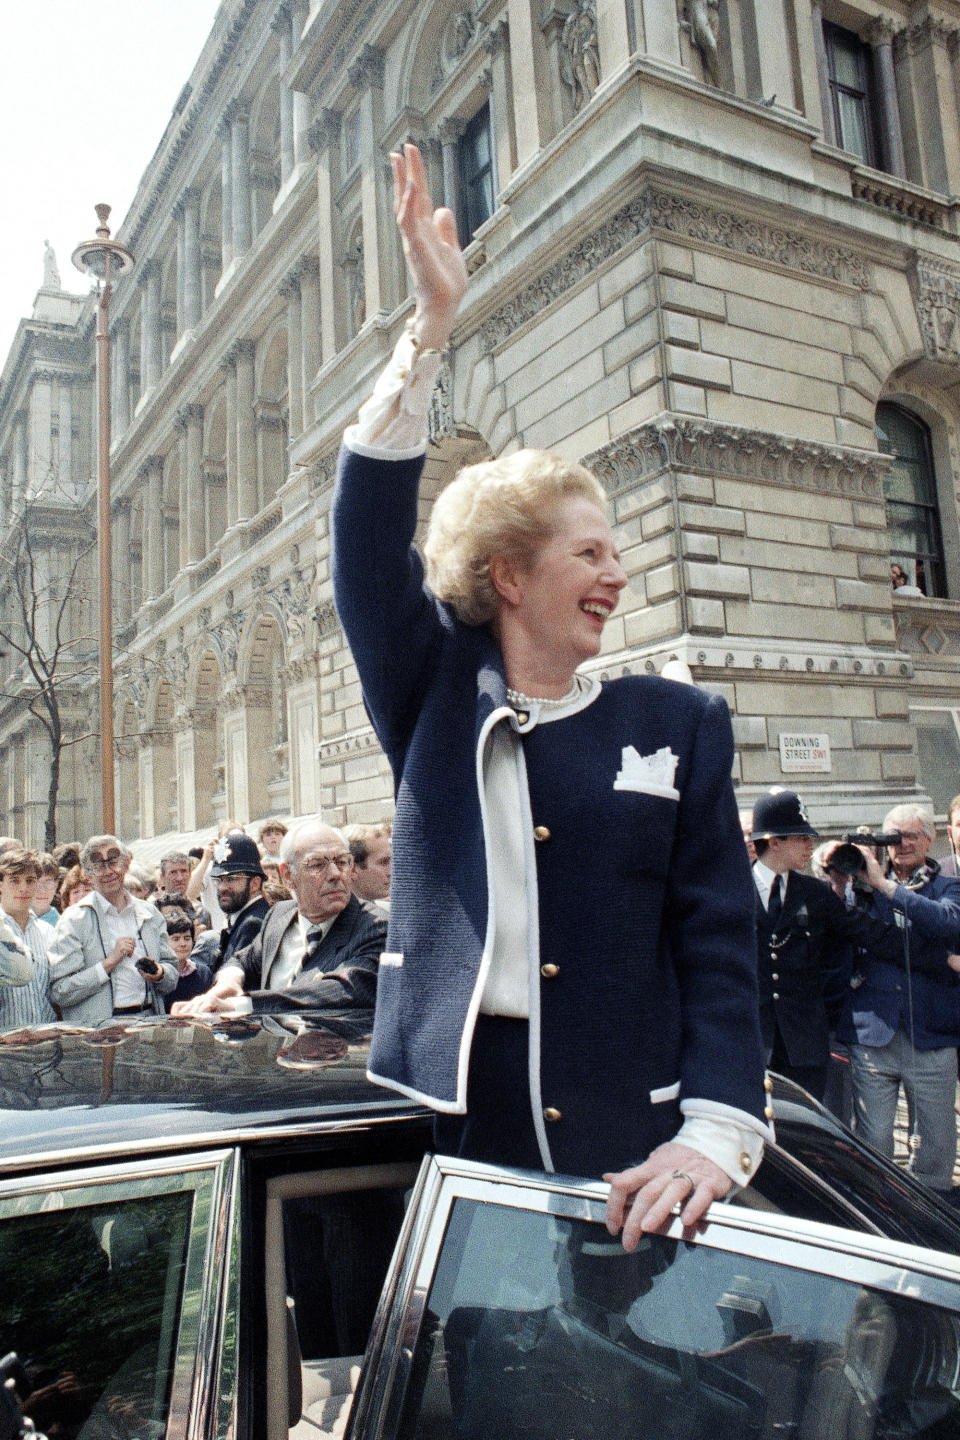 FILE - Britain's Prime Minister Margaret Thatcher waves to the crowd after she was reelected as Britain's Premier, in Downing Street, London, Friday, June 12, 1987. Two people are running to be Britain’s next prime minister, but a third presence looms over the contest: Margaret Thatcher. Almost a decade after her death, the late former prime minister casts a powerful spell over Britain's Conservative Party. In the race to replace Boris Johnson as Conservative leader and prime minister, both Foreign Secretary Liz Truss and former Treasury chief Rishi Sunak claim to embody the values of Thatcher. (AP Photo/Dave Caulkin, File)